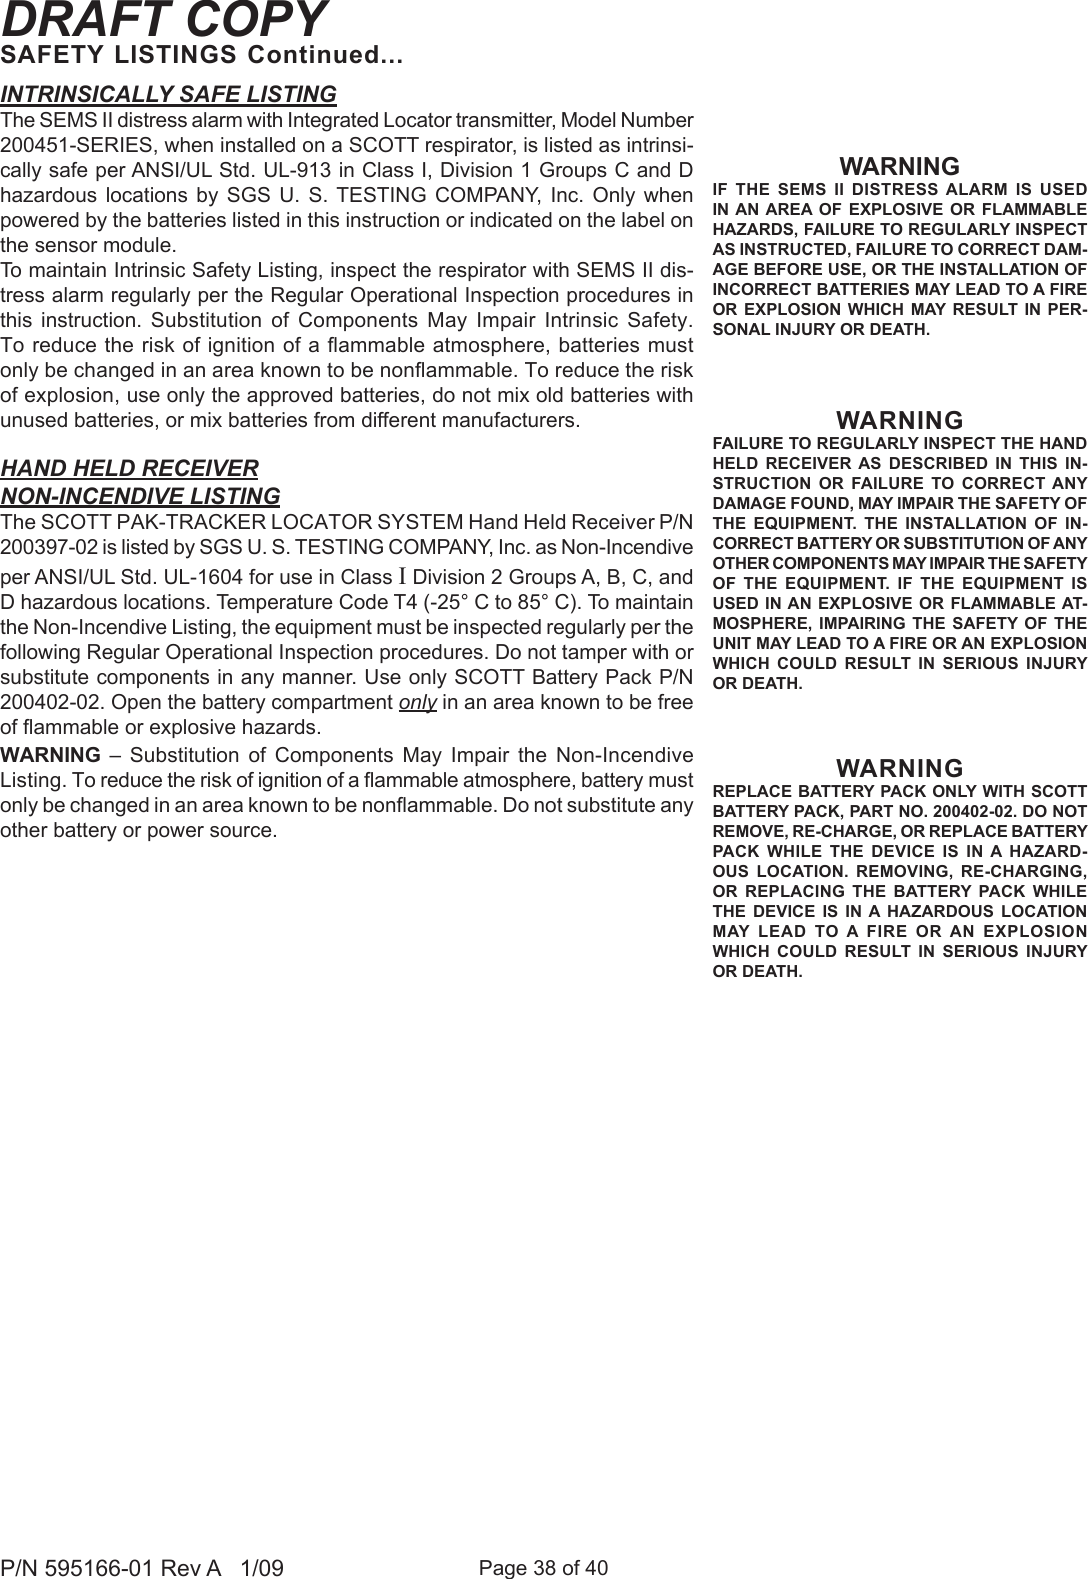 Page 38 of 40P/N 595166-01 Rev A   1/09DRAFT COPYSAFETY LISTINGS Continued...INTRINSICALLY SAFE LISTINGThe SEMS II distress alarm with Integrated Locator transmitter, Model Number 200451-SERIES, when installed on a SCOTT respirator, is listed as intrinsi-cally safe per ANSI/UL Std. UL-913 in Class I, Division 1 Groups C and D hazardous  locations  by  SGS  U.  S. TESTING  COMPANY,  Inc.  Only  when powered by the batteries listed in this instruction or indicated on the label on the sensor module.To maintain Intrinsic Safety Listing, inspect the respirator with SEMS II dis-tress alarm regularly per the Regular Operational Inspection procedures in this  instruction.  Substitution  of  Components  May  Impair  Intrinsic  Safety. To reduce the risk of ignition of a ammable atmosphere, batteries must only be changed in an area known to be nonammable. To reduce the risk of explosion, use only the approved batteries, do not mix old batteries with unused batteries, or mix batteries from different manufacturers.HAND HELD RECEIVERNON-INCENDIVE LISTINGThe SCOTT PAK-TRACKER LOCATOR SYSTEM Hand Held Receiver P/N 200397-02 is listed by SGS U. S. TESTING COMPANY, Inc. as Non-Incendive per ANSI/UL Std. UL-1604 for use in Class I Division 2 Groups A, B, C, and D hazardous locations. Temperature Code T4 (-25° C to 85° C). To maintain the Non-Incendive Listing, the equipment must be inspected regularly per the following Regular Operational Inspection procedures. Do not tamper with or substitute components in any manner. Use only SCOTT Battery Pack P/N 200402-02. Open the battery compartment only in an area known to be free of ammable or explosive hazards.WARNING  –  Substitution  of  Components  May  Impair  the  Non-Incendive Listing. To reduce the risk of ignition of a ammable atmosphere, battery must only be changed in an area known to be nonammable. Do not substitute any other battery or power source.WARNINGIF  THE  SEMS  II  DISTRESS  ALARM  IS  USED IN AN  AREA OF  EXPLOSIVE  OR  FLAMMABLE HAZARDS, FAILURE TO REGULARLY INSPECT AS INSTRUCTED, FAILURE TO CORRECT DAM-AGE BEFORE USE, OR THE INSTALLATION OF INCORRECT BATTERIES MAY LEAD TO A FIRE OR EXPLOSION WHICH  MAY RESULT  IN  PER-SONAL INJURY OR DEATH. WARNINGFAILURE TO REGULARLY INSPECT THE HAND HELD  RECEIVER  AS  DESCRIBED  IN  THIS  IN-STRUCTION  OR  FAILURE  TO  CORRECT  ANY DAMAGE FOUND, MAY IMPAIR THE SAFETY OF THE  EQUIPMENT.  THE  INSTALLATION  OF  IN-CORRECT BATTERY OR SUBSTITUTION OF ANY OTHER COMPONENTS MAY IMPAIR THE SAFETY OF  THE  EQUIPMENT.  IF  THE  EQUIPMENT  IS USED IN AN EXPLOSIVE OR FLAMMABLE AT-MOSPHERE,  IMPAIRING  THE  SAFETY  OF  THE UNIT MAY LEAD TO A FIRE OR AN EXPLOSION WHICH  COULD RESULT  IN  SERIOUS  INJURY OR DEATH.WARNINGREPLACE BATTERY PACK ONLY WITH SCOTT BATTERY PACK, PART NO. 200402-02. DO NOT REMOVE, RE-CHARGE, OR REPLACE BATTERY PACK  WHILE  THE  DEVICE  IS  IN A  HAZARD-OUS  LOCATION.  REMOVING,  RE-CHARGING, OR  REPLACING  THE  BATTERY  PACK  WHILE THE  DEVICE  IS  IN A  HAZARDOUS  LOCATION MAY  LEAD  TO A  FIRE  OR AN  EXPLOSION WHICH  COULD RESULT  IN  SERIOUS  INJURY OR DEATH.